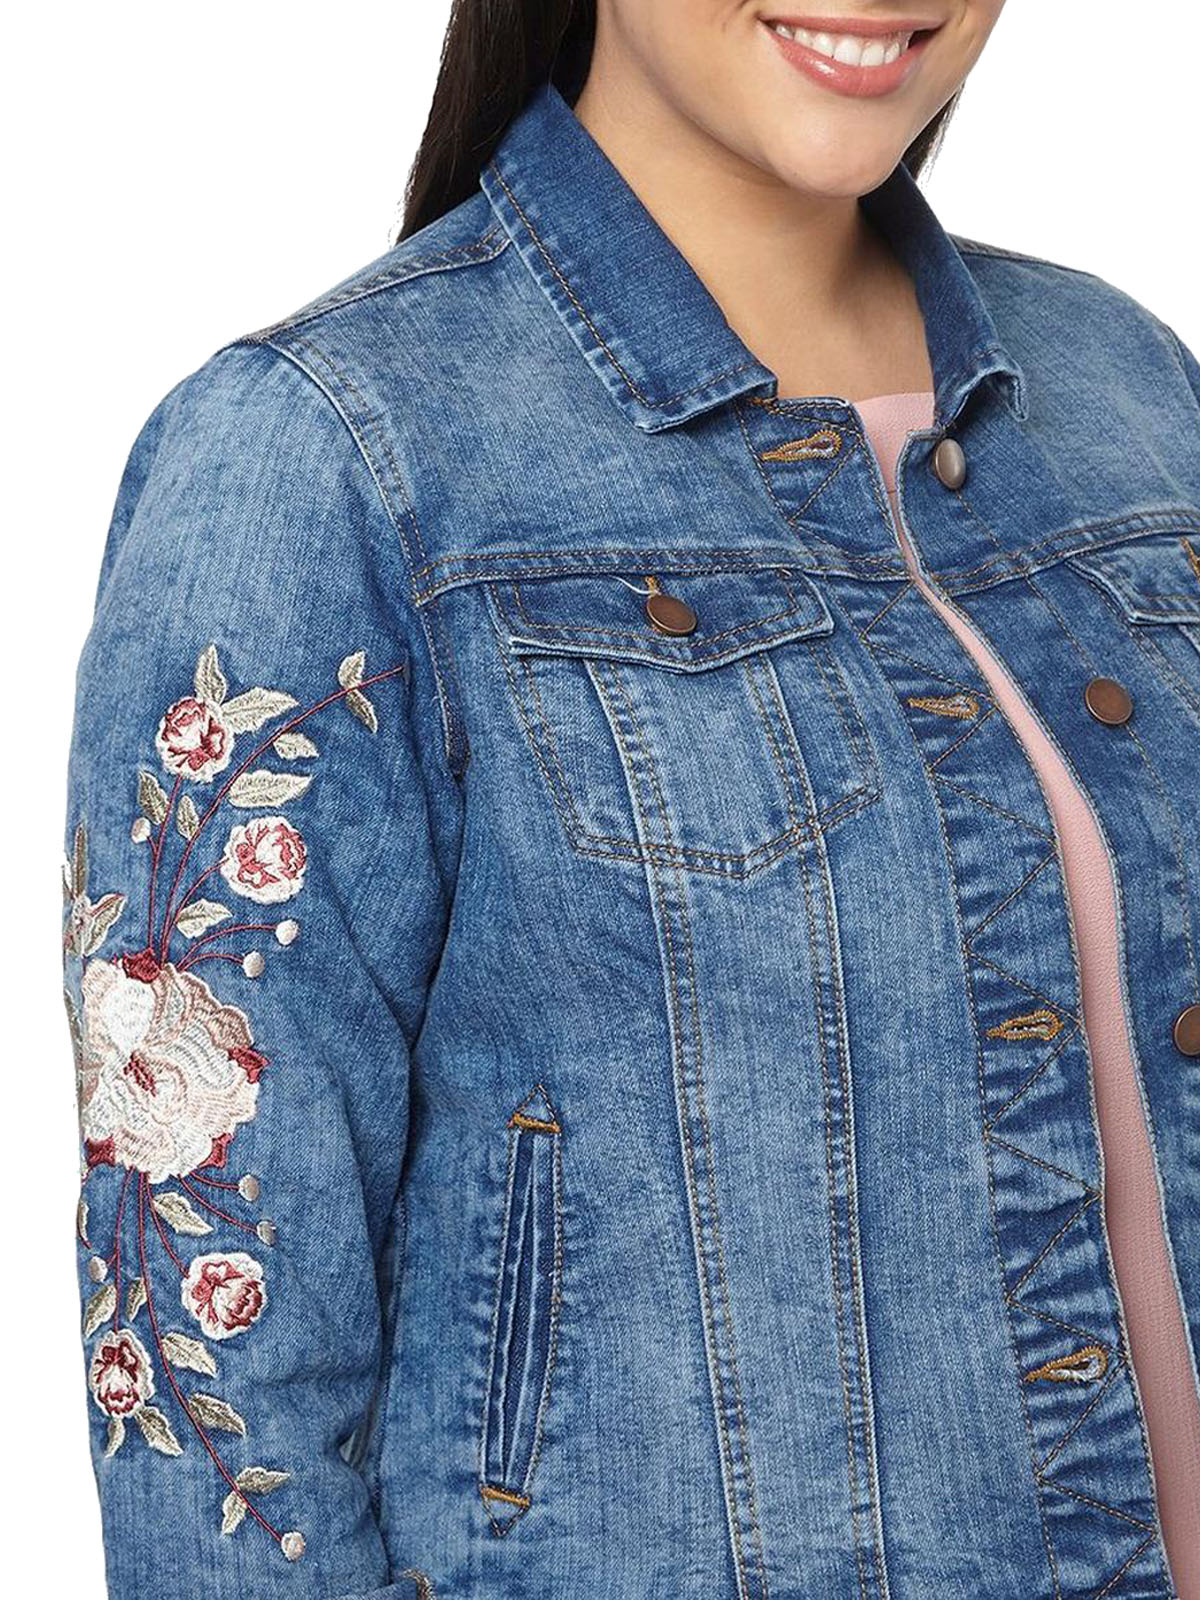 DENIM BLUE Floral Embroidery Sleeves Denim Jacket - Plus Size 26 to 28